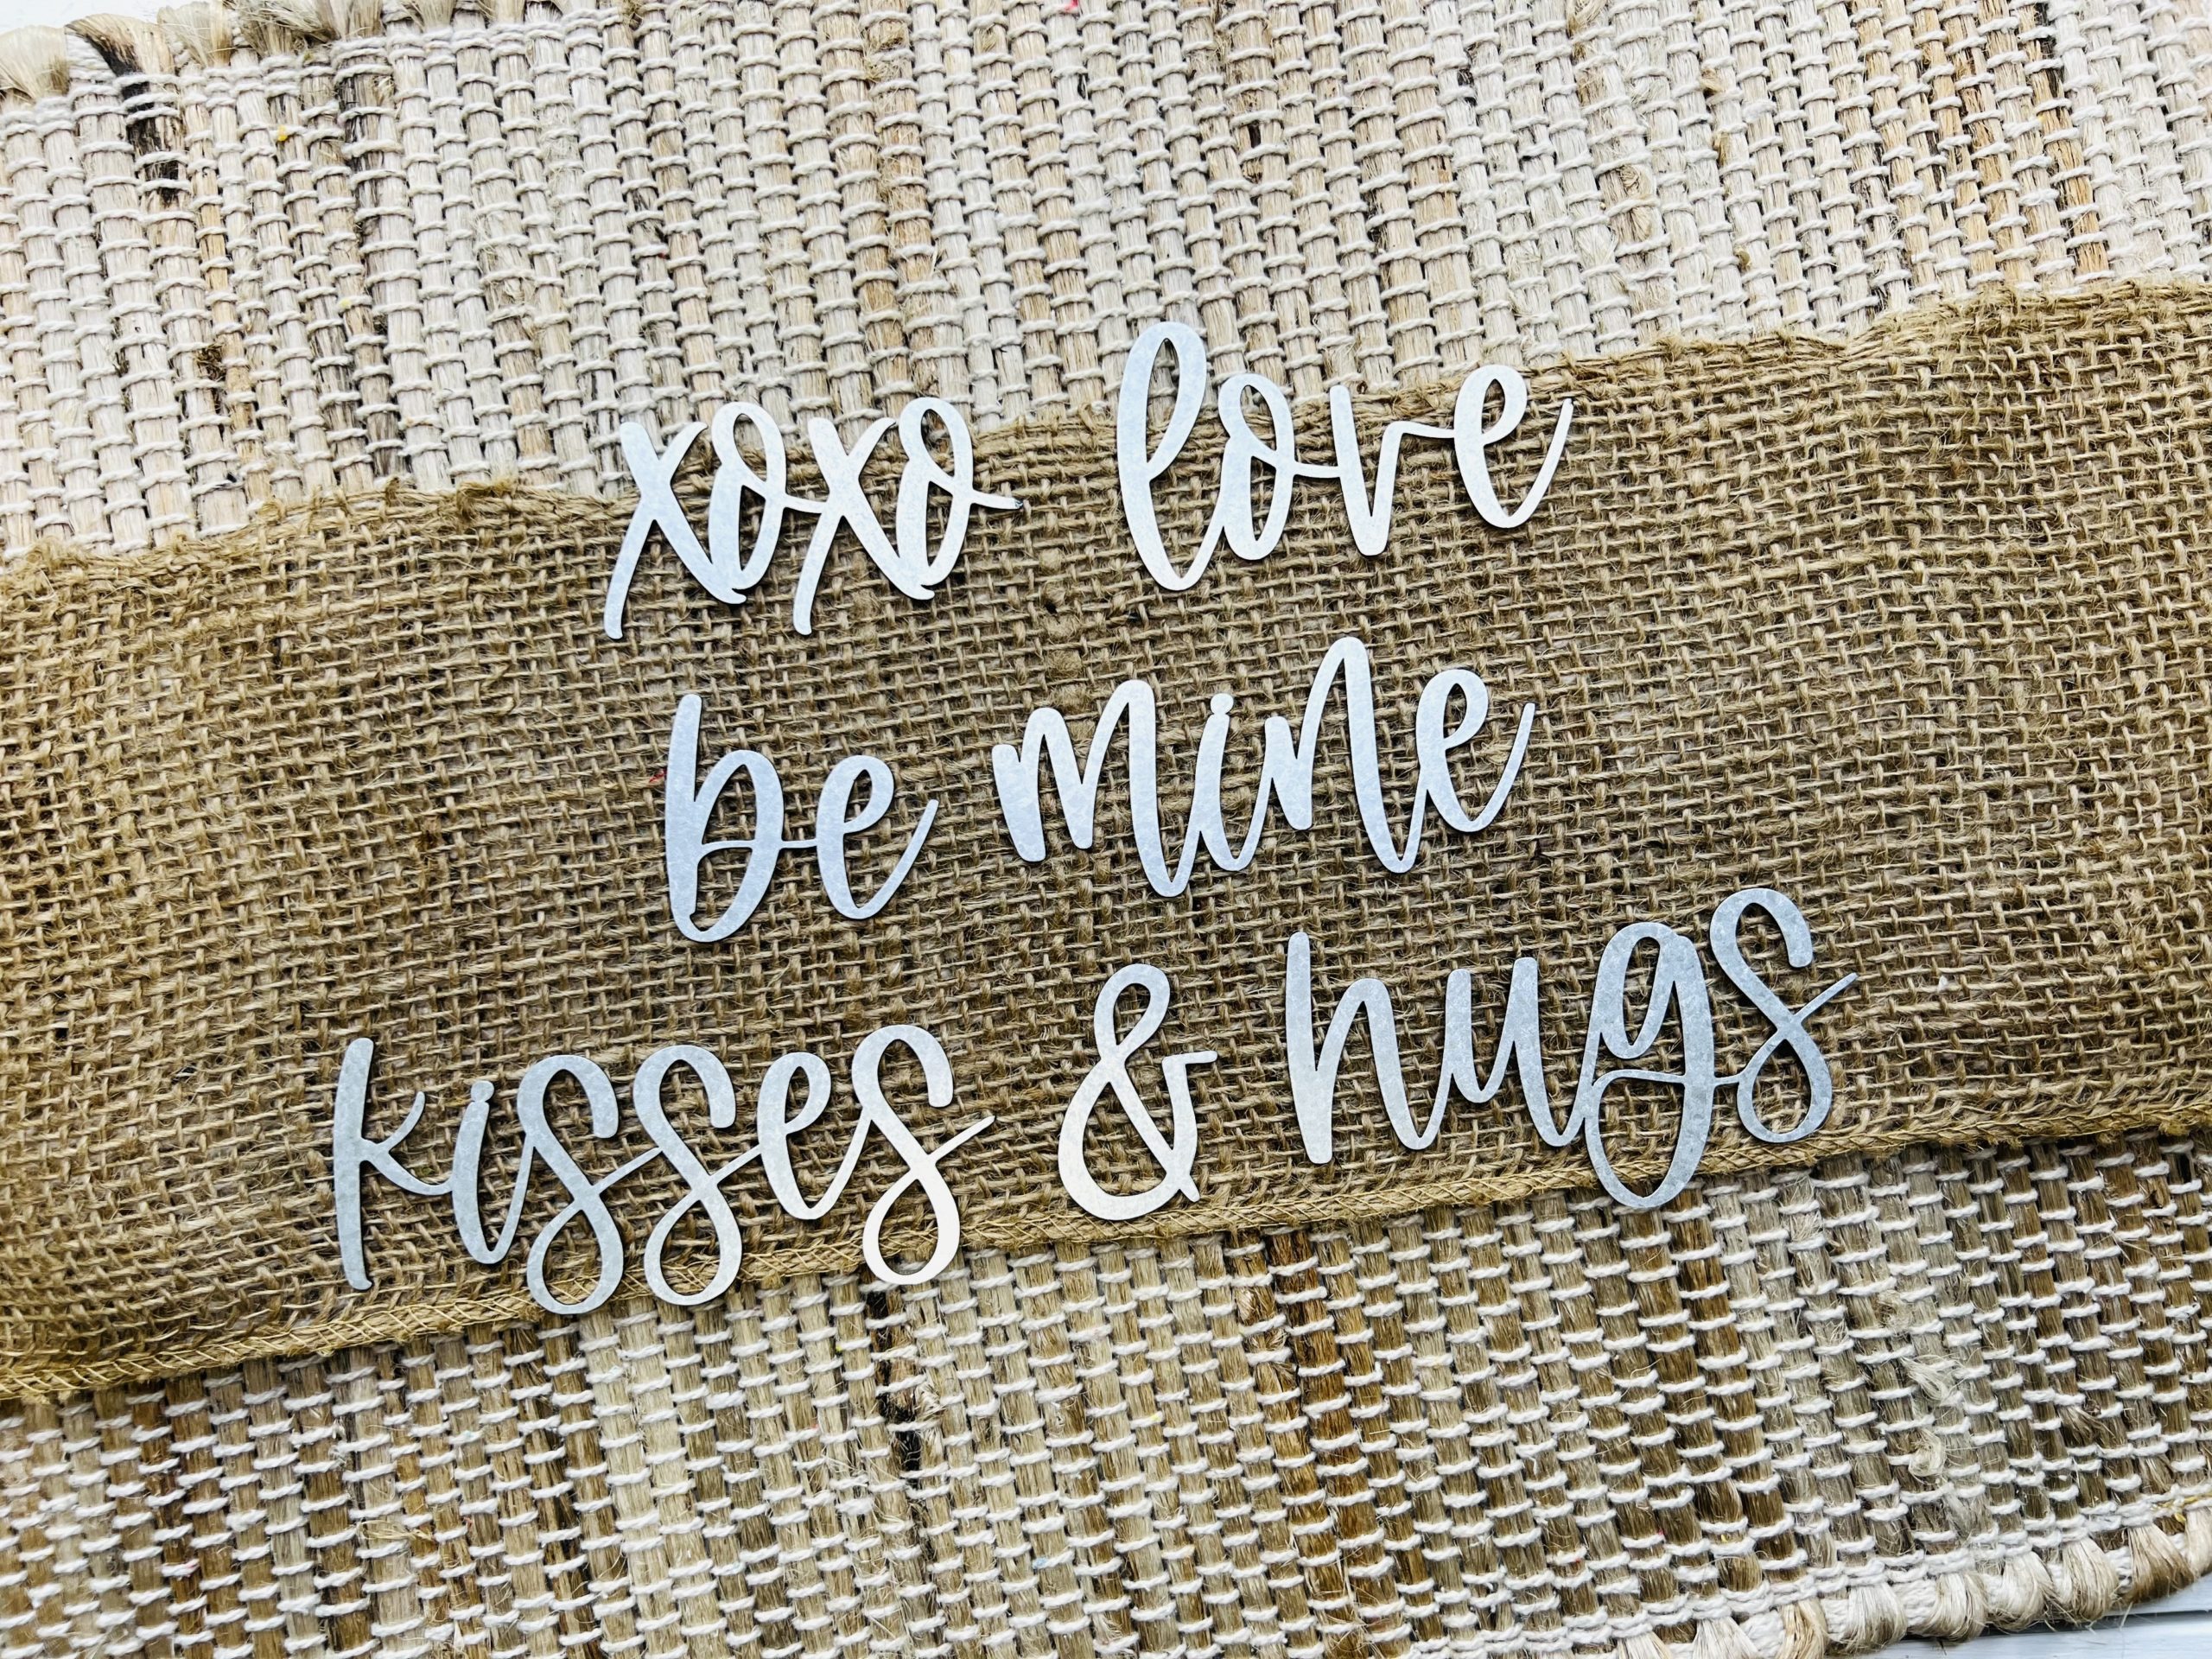 valentines words made out of galvanized metal for crafting and home decor